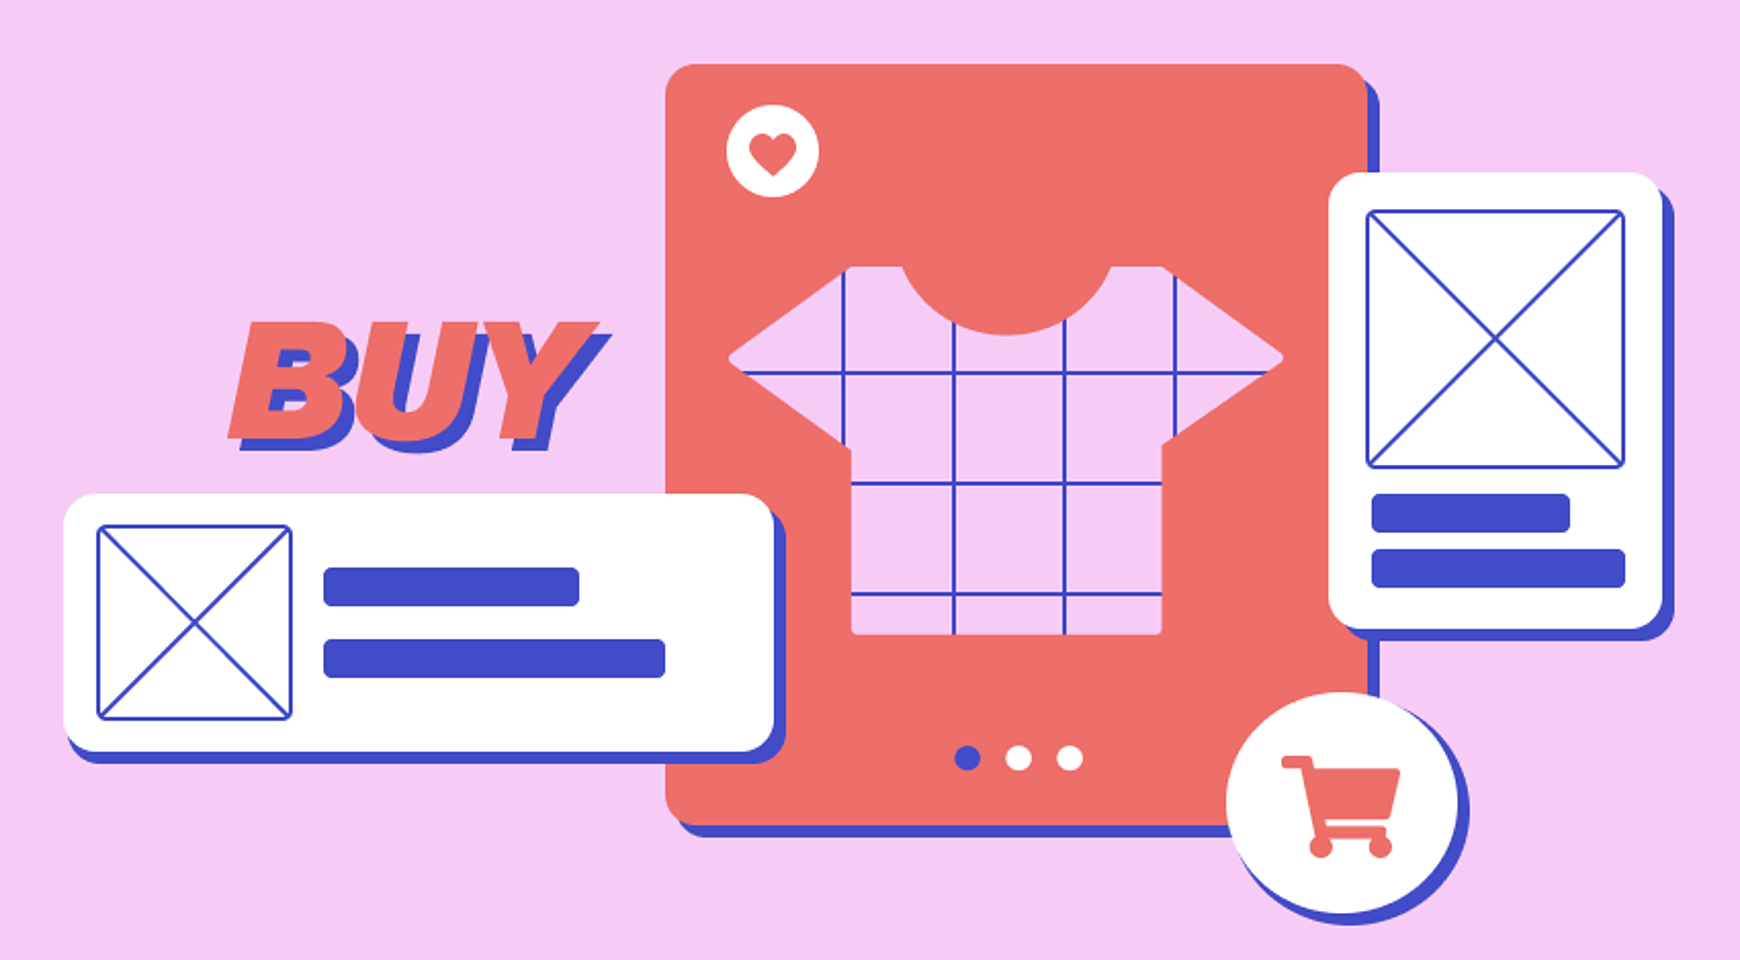 A UX case study on Shopee (and my redesign of it)